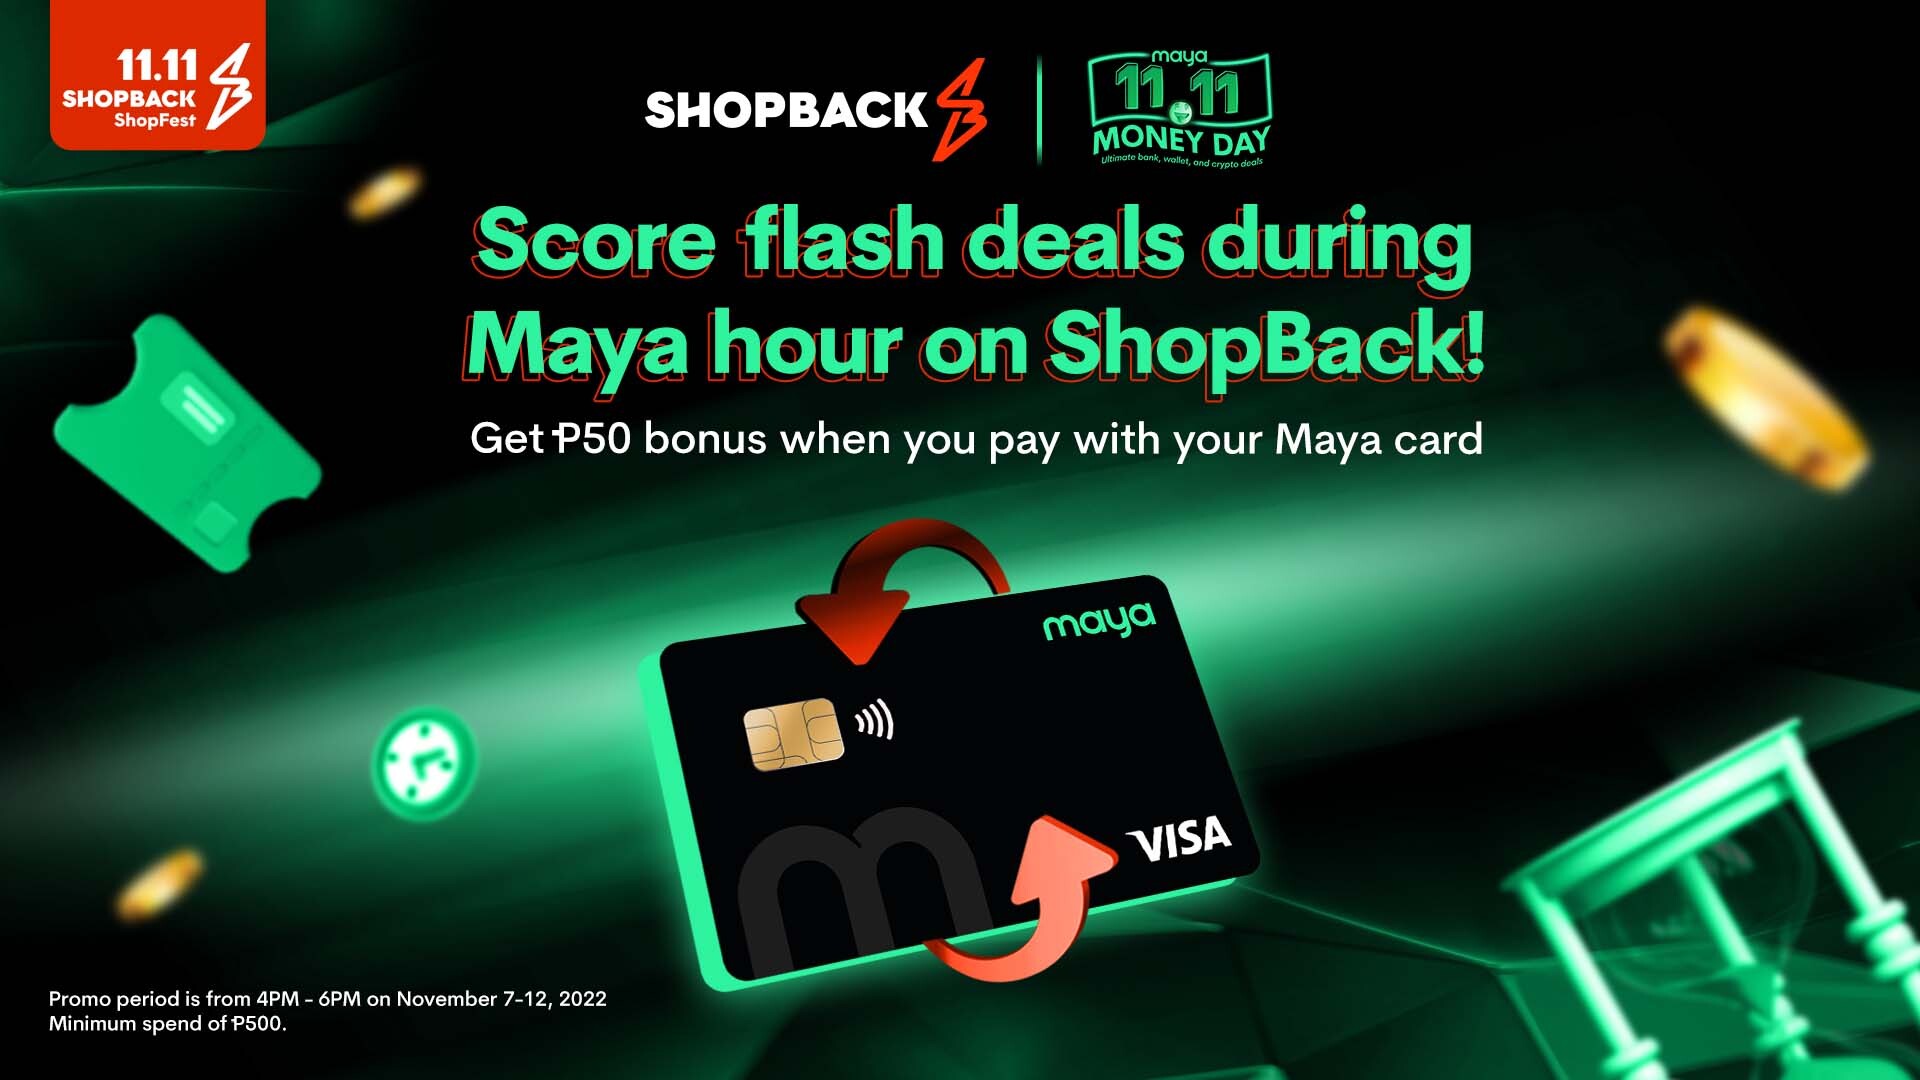 Score flash deals this 11.11 on ShopBack when you use your Maya card!